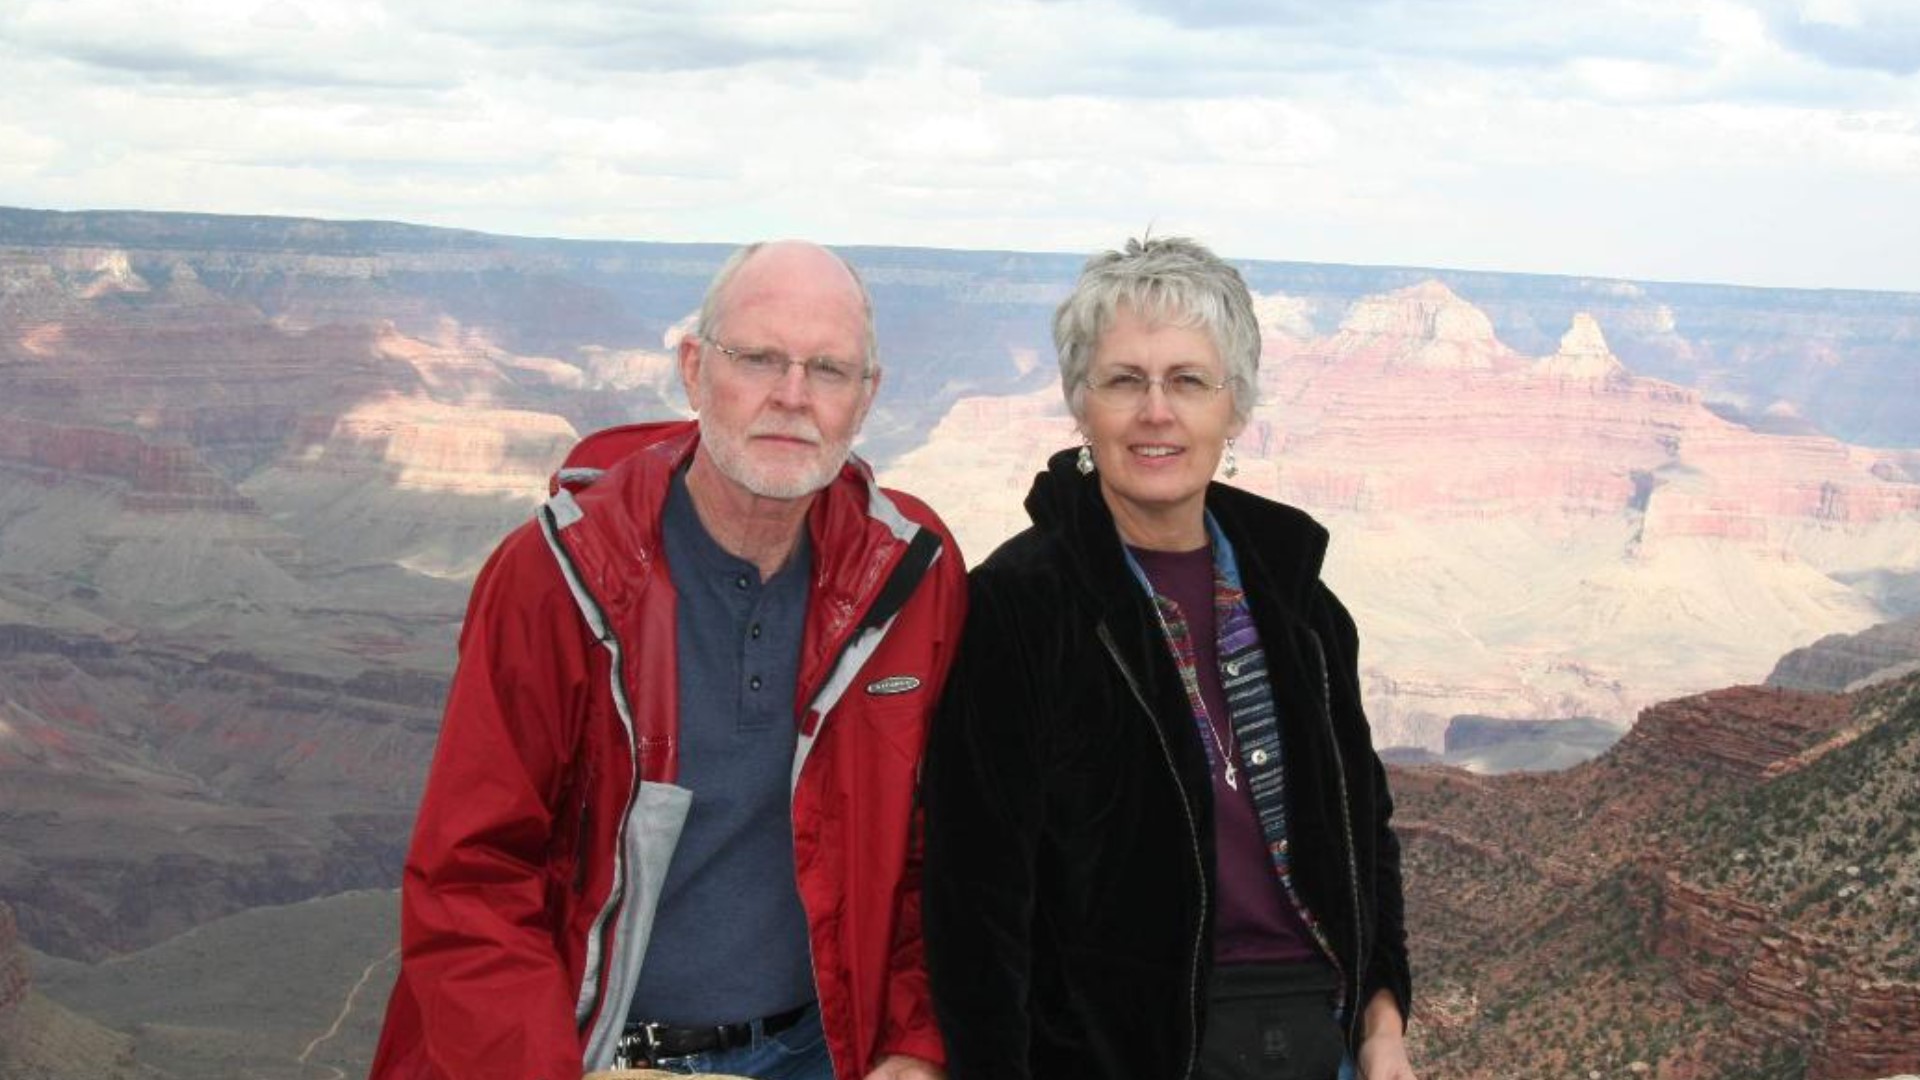 Following retirement, one couple decided to spend eight years on the road. After all of that adventure, they decided to moved to Central Texas.